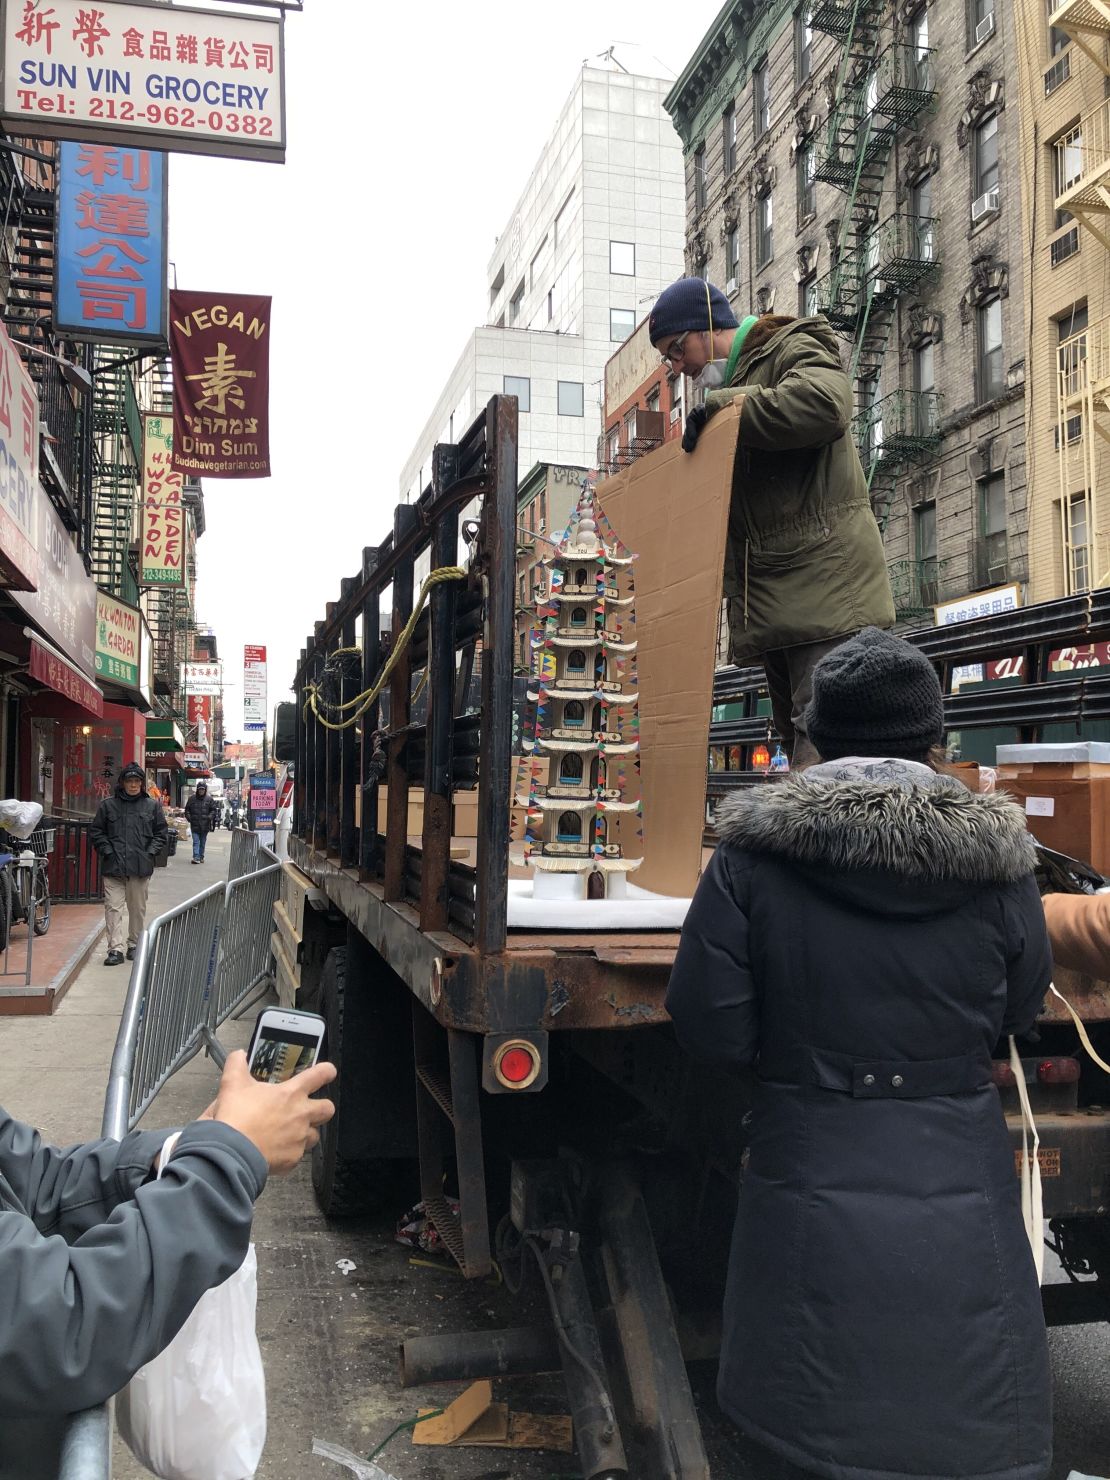 A paper sculpture of a Chinese pagoda made in detention by one of 286 undocumented immigrants from the Golden Venture, a ship that ran aground in NYC in 1993, being rescued from MOCA's fire-damaged archives building in Manhattan Chinatown on January 31, 2020. 